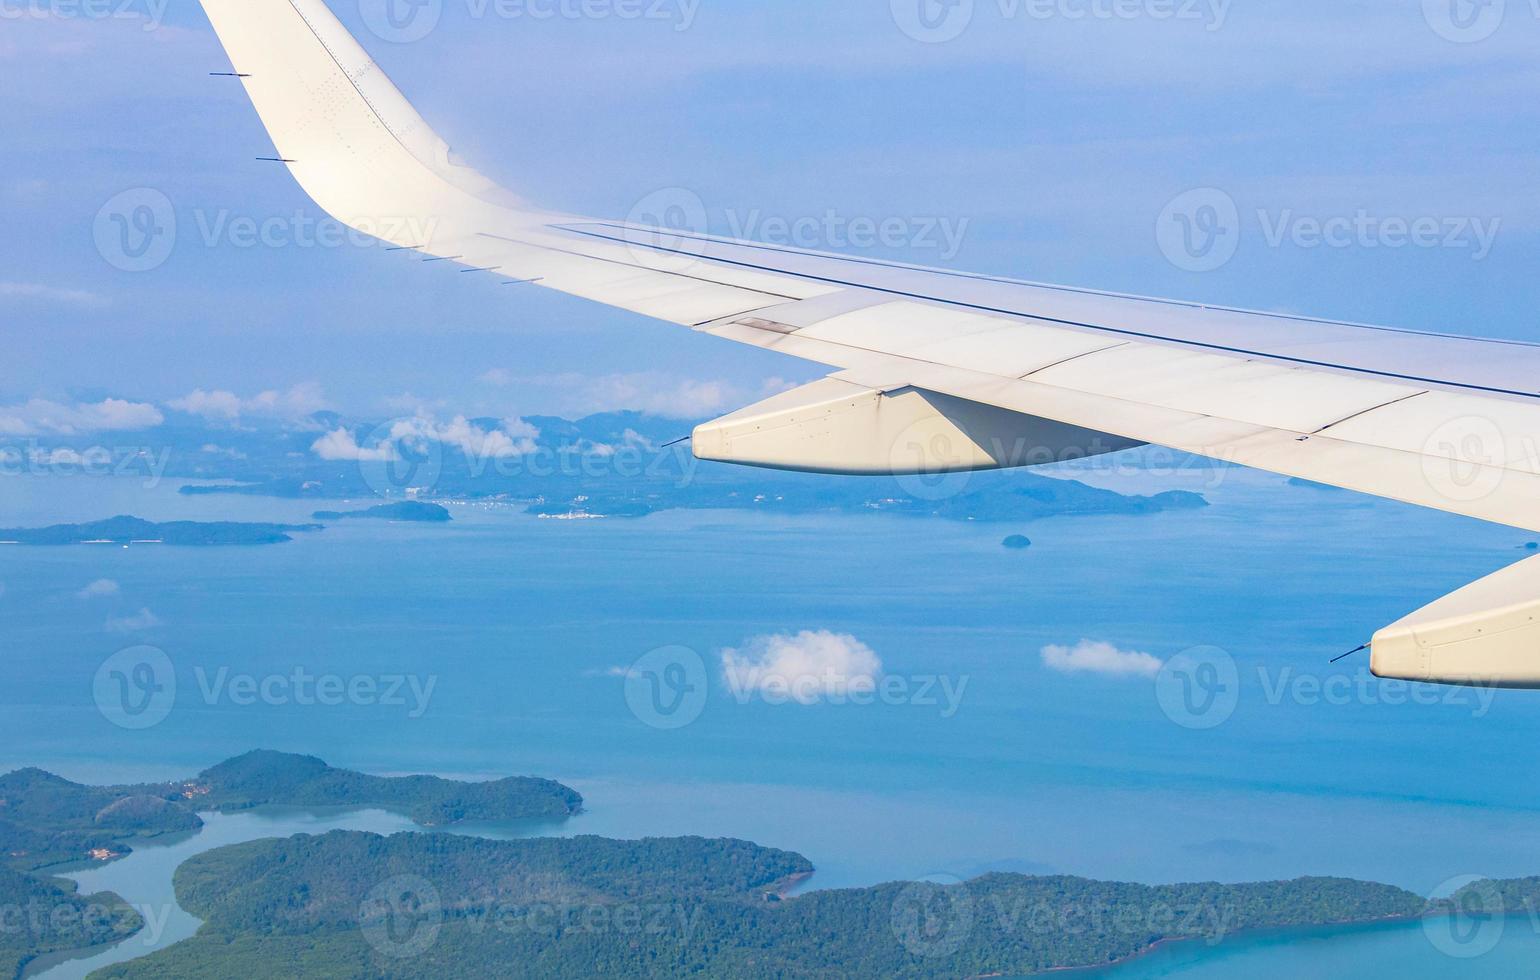 Flying over Thailand panoramic view of islands beaches turquoise waters. photo